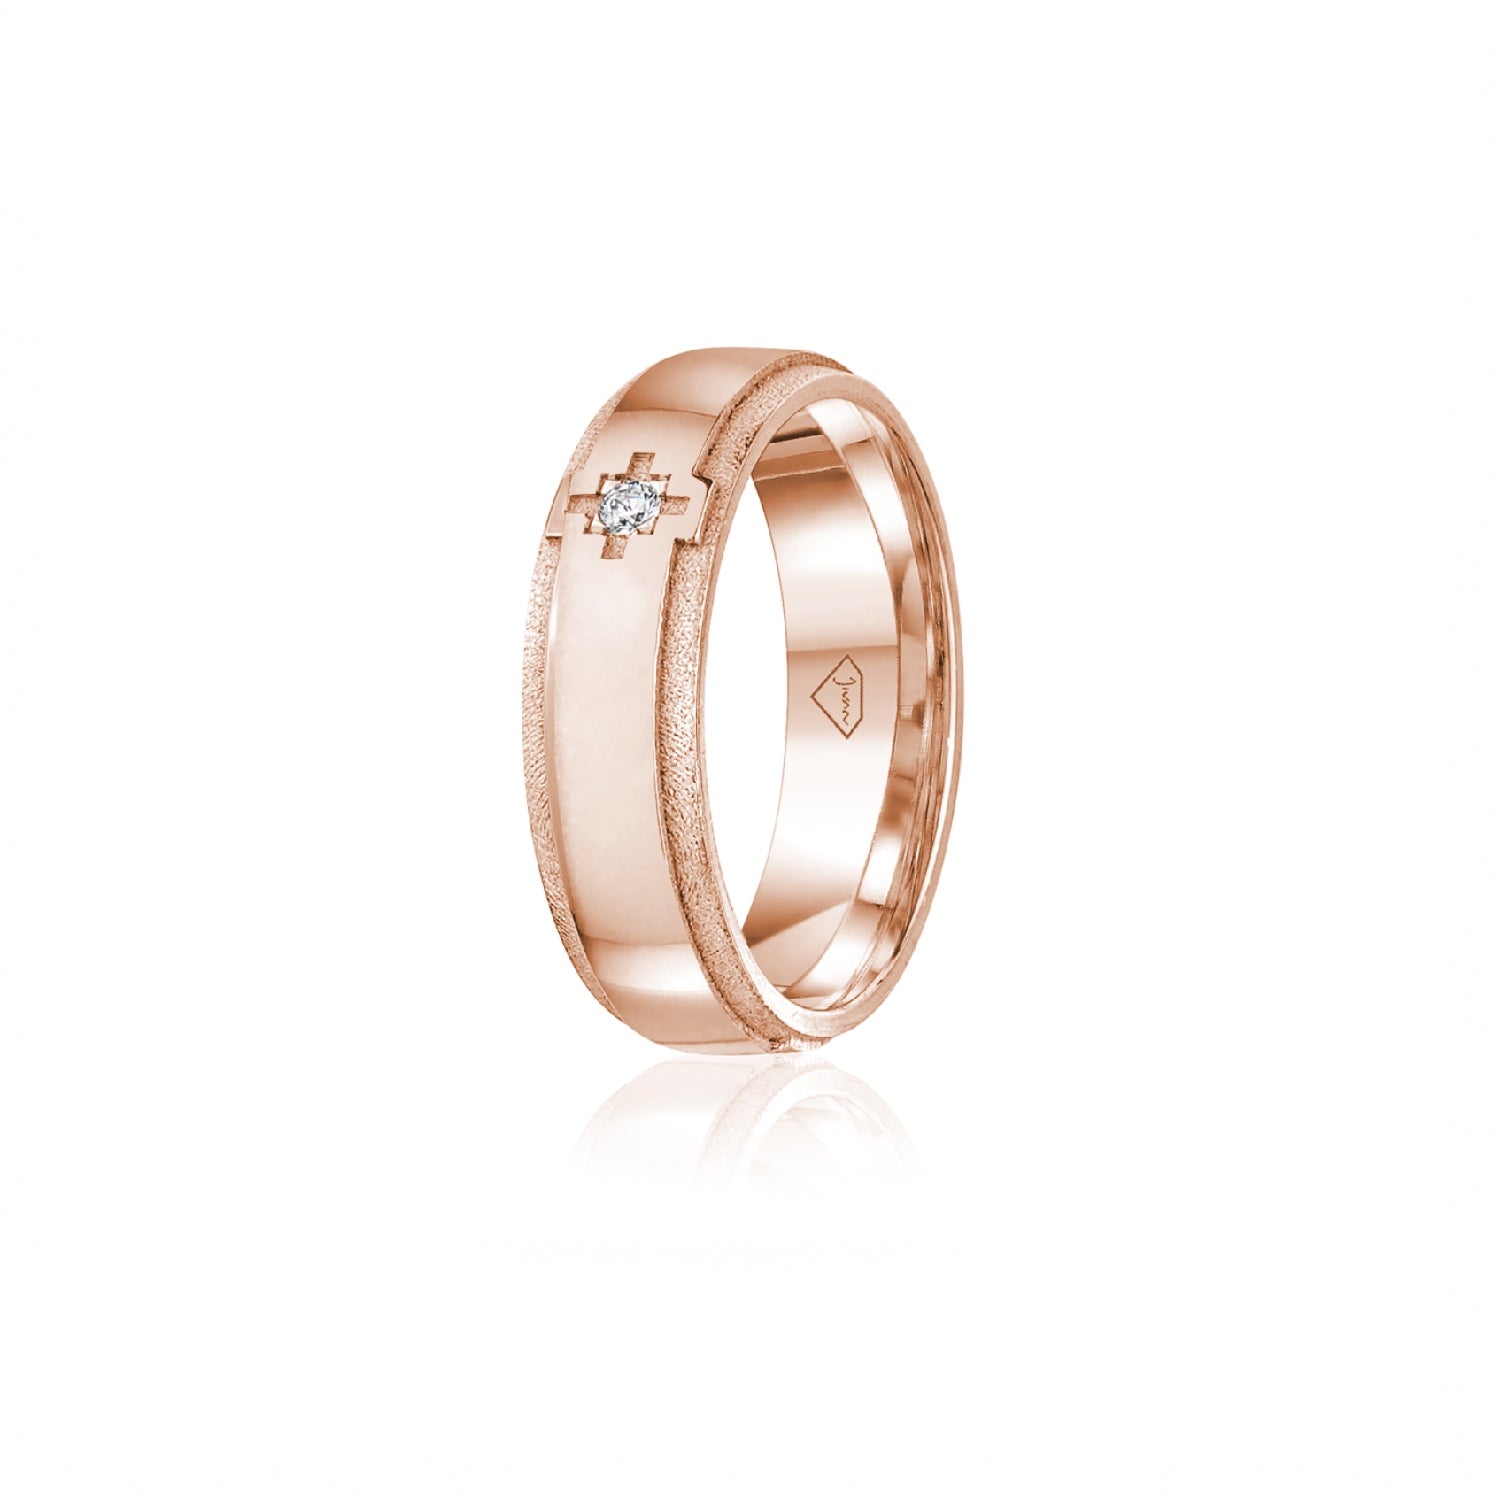 Diamond Accent Polished Finish Bevelled Edge 8-9 mm Wedding Ring in Rose Gold